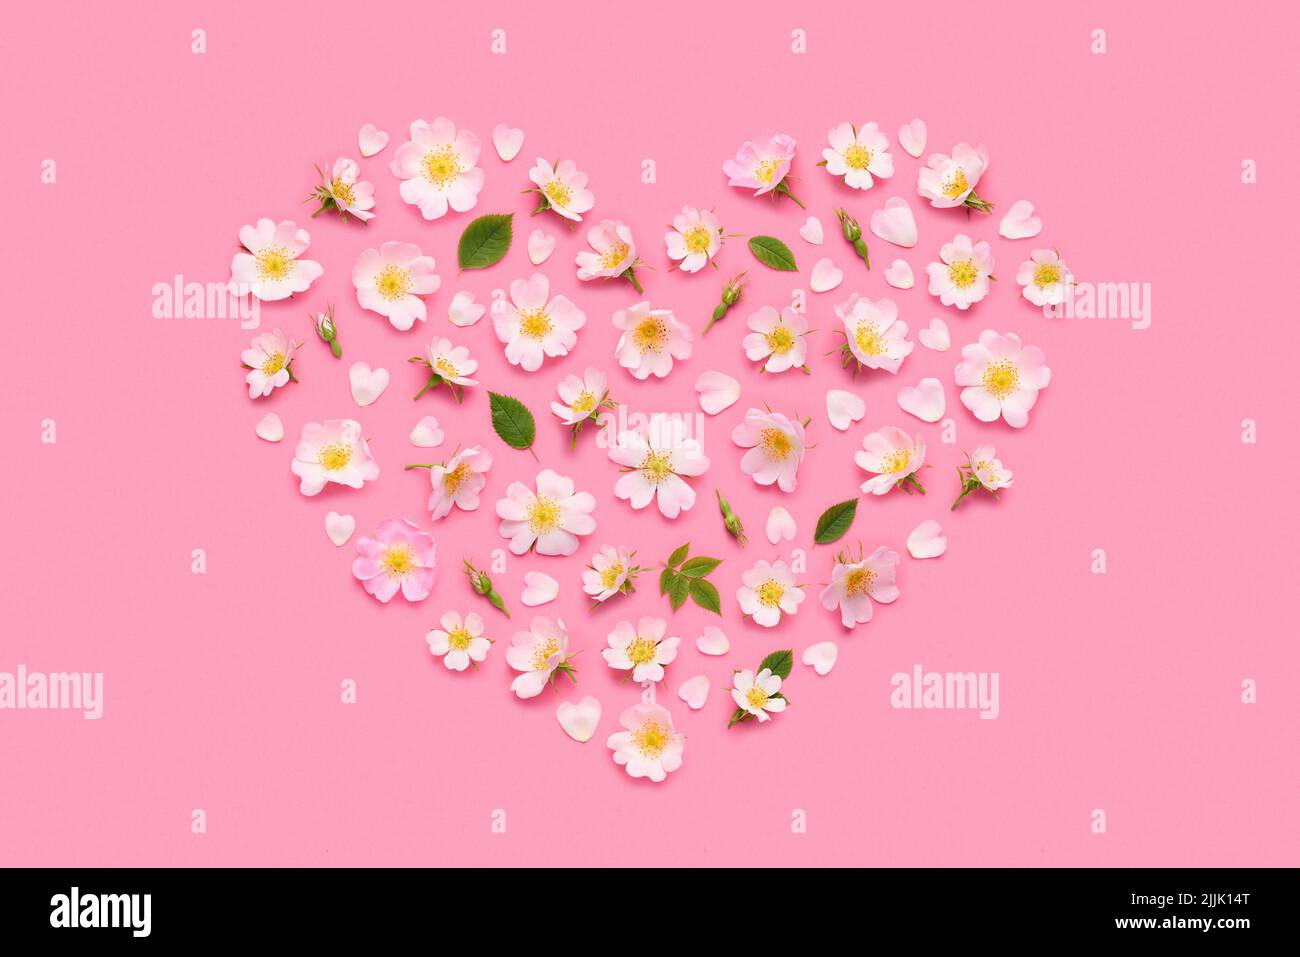 Rose flowers, leaves buds and petals in heart shape on pink background top view flat lay Stock Photo